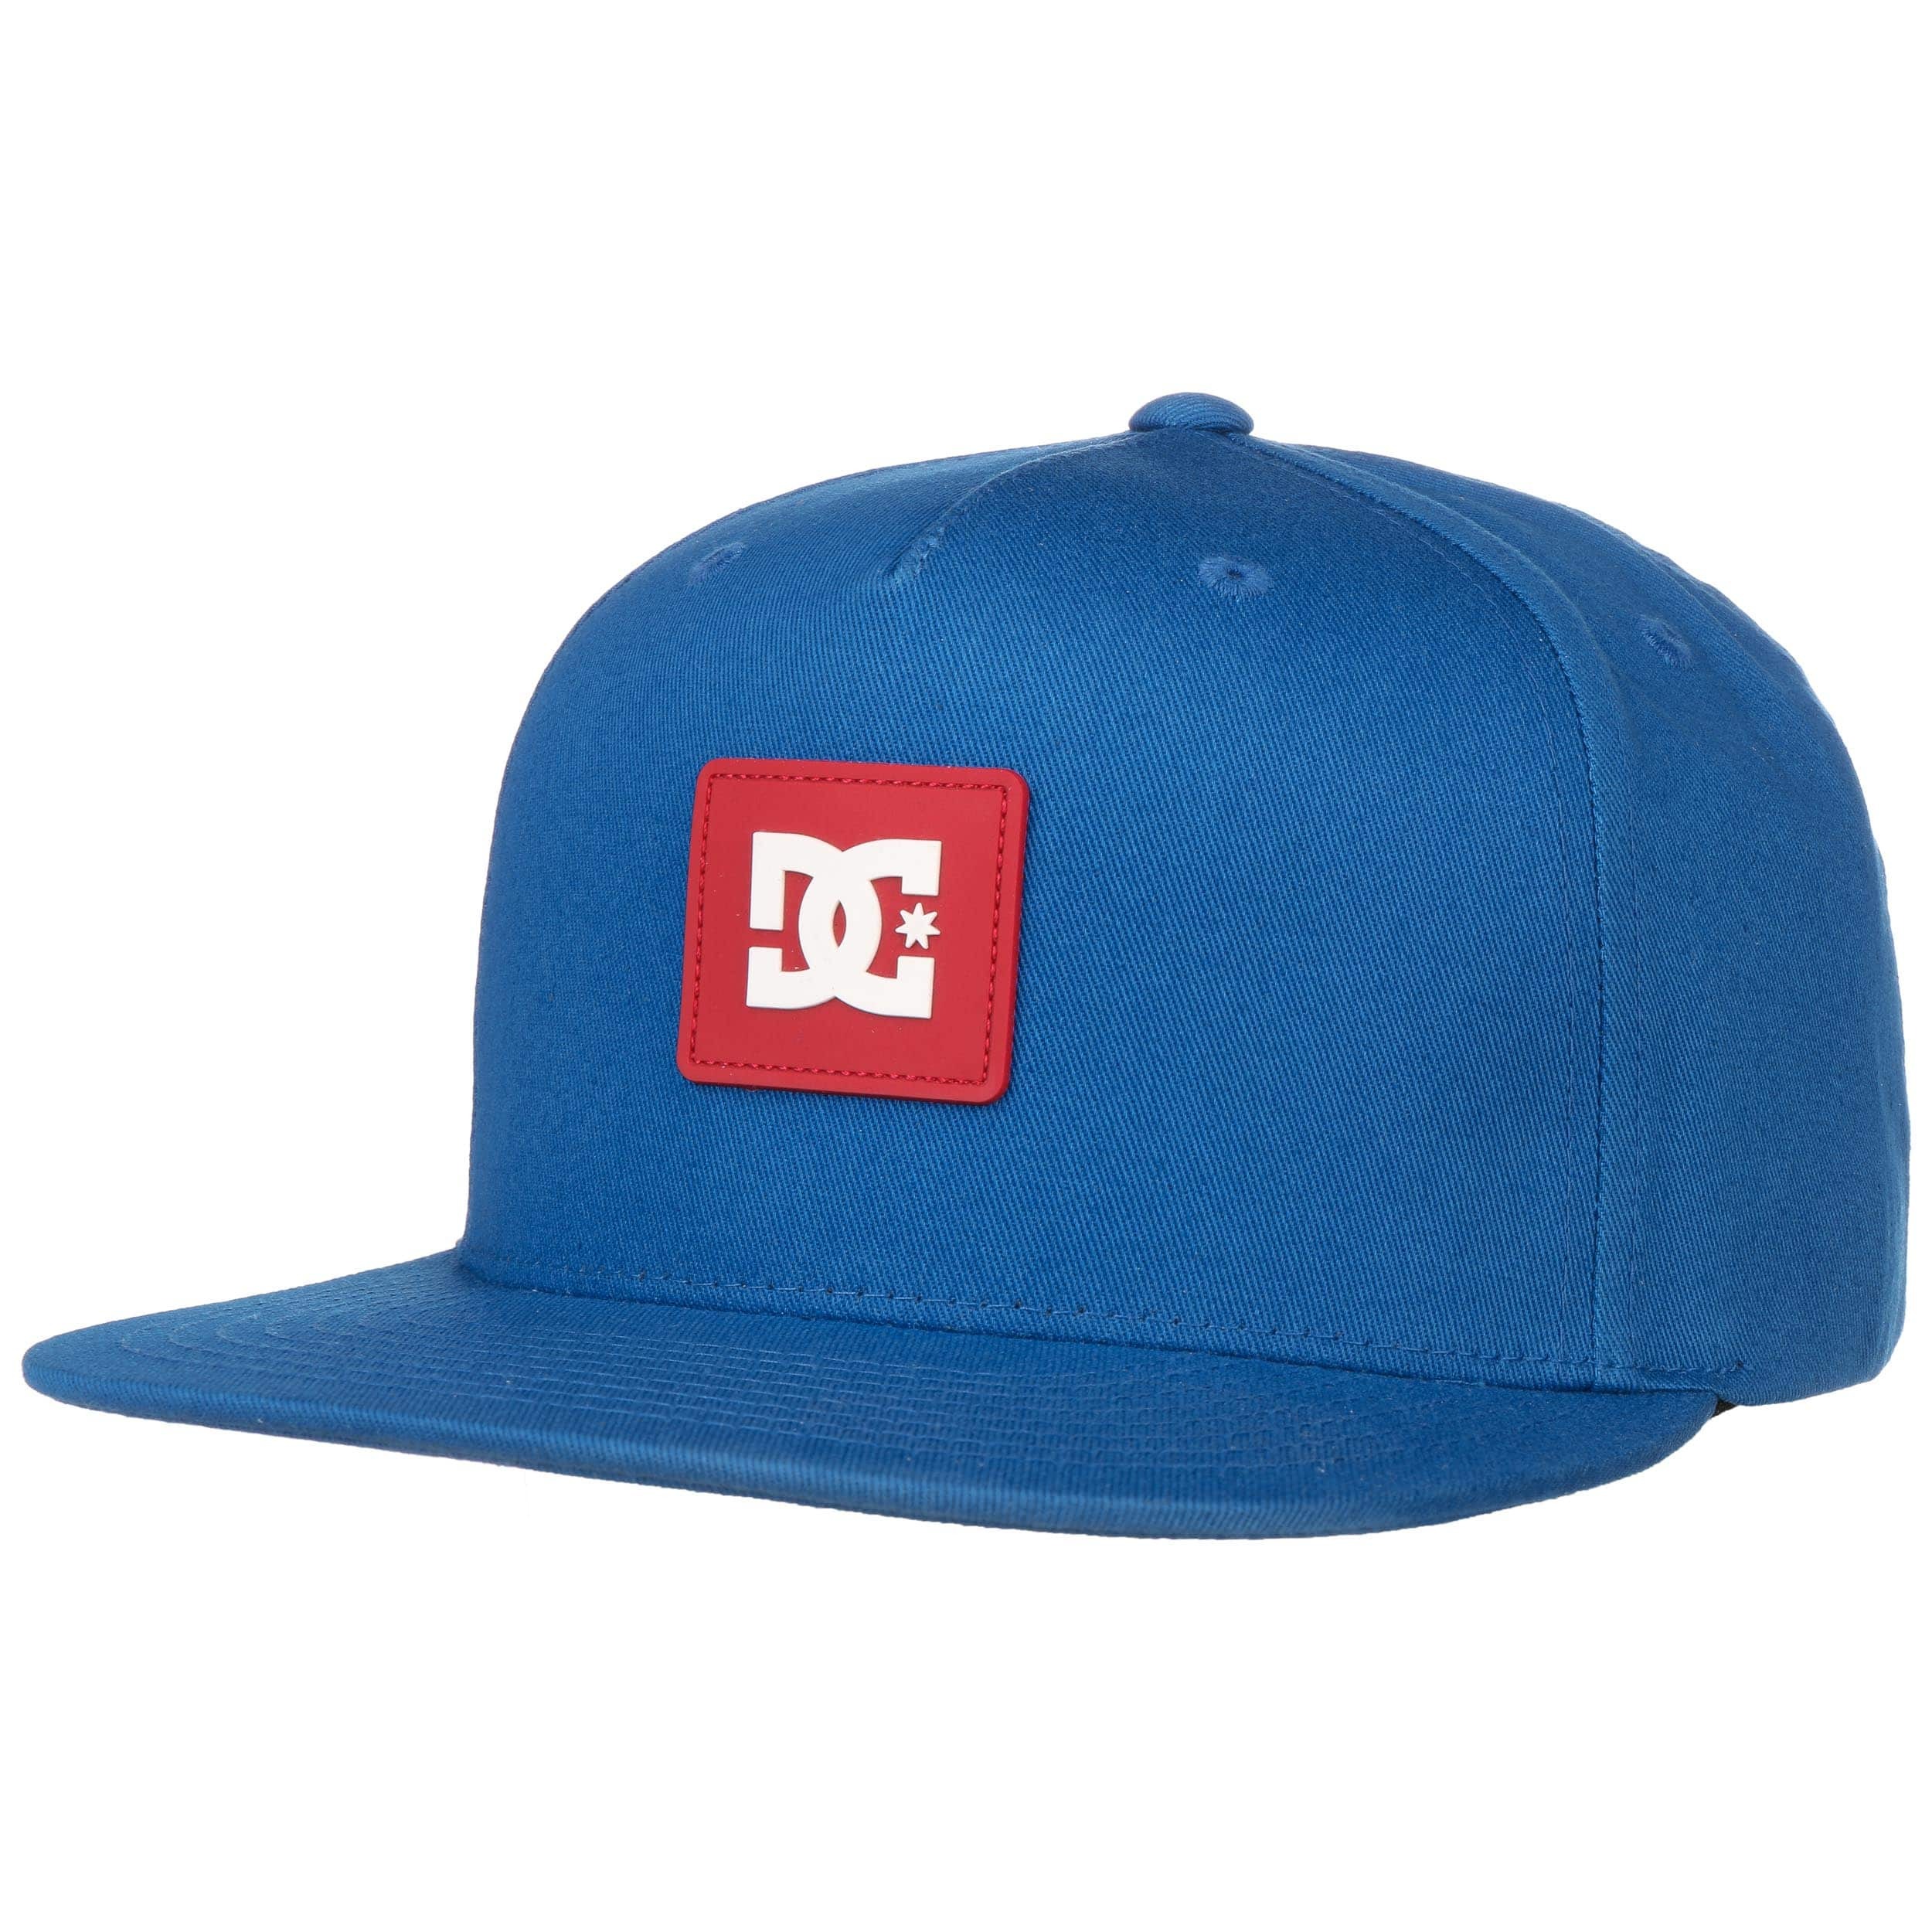 Snapdoodle Snapback Cap by DC Shoes Co 